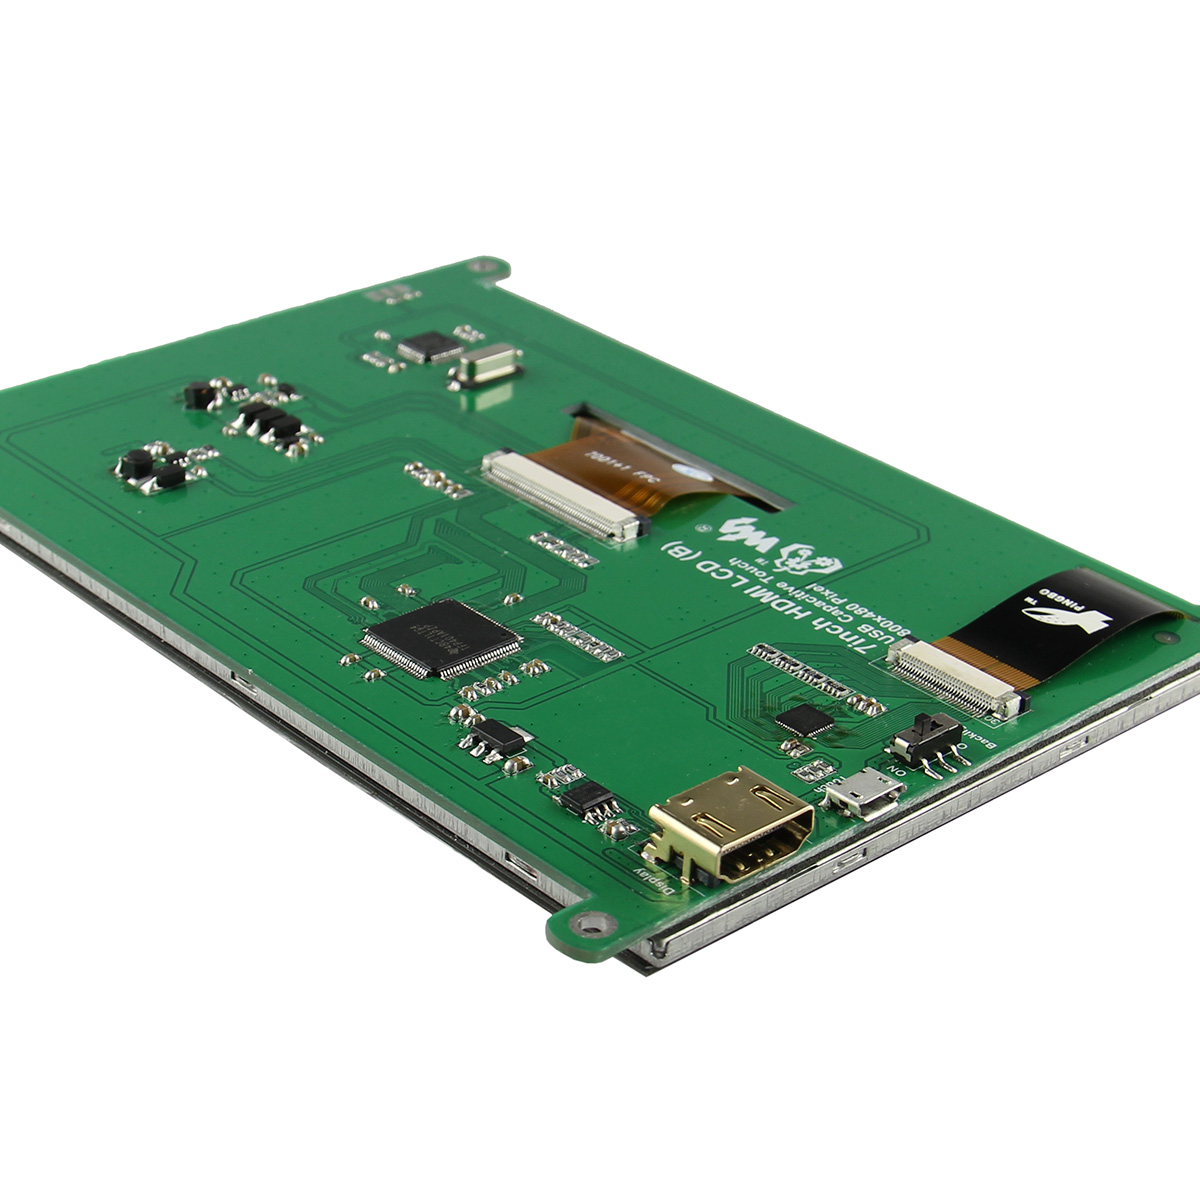 7-Inch-800x480-TFT-LCD-HD-Capacitive-Touch-Display-With-Acrylic-Stander-Bracket-For-Raspberry-Pi-3B2-1042844